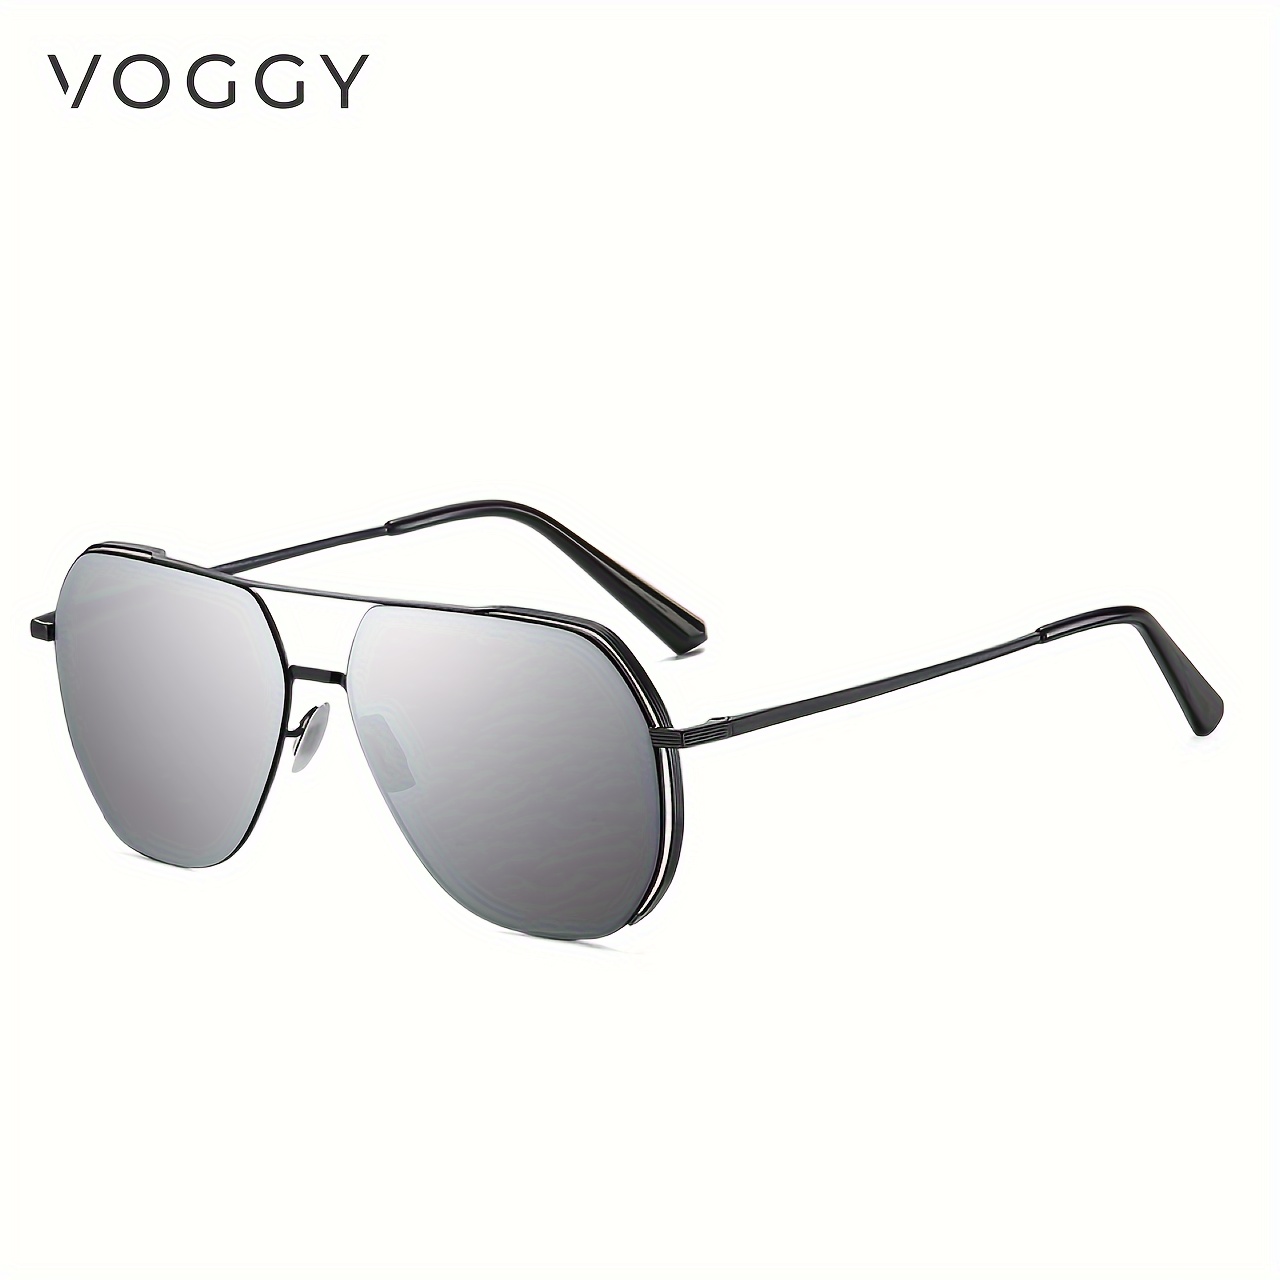 Unique Nylon Lenses Metal Frame Retro Polarized Aviator Sunglasses, Flat Top, for Men Women Outdoor Sports Party Vacation Travel Driving Fishing